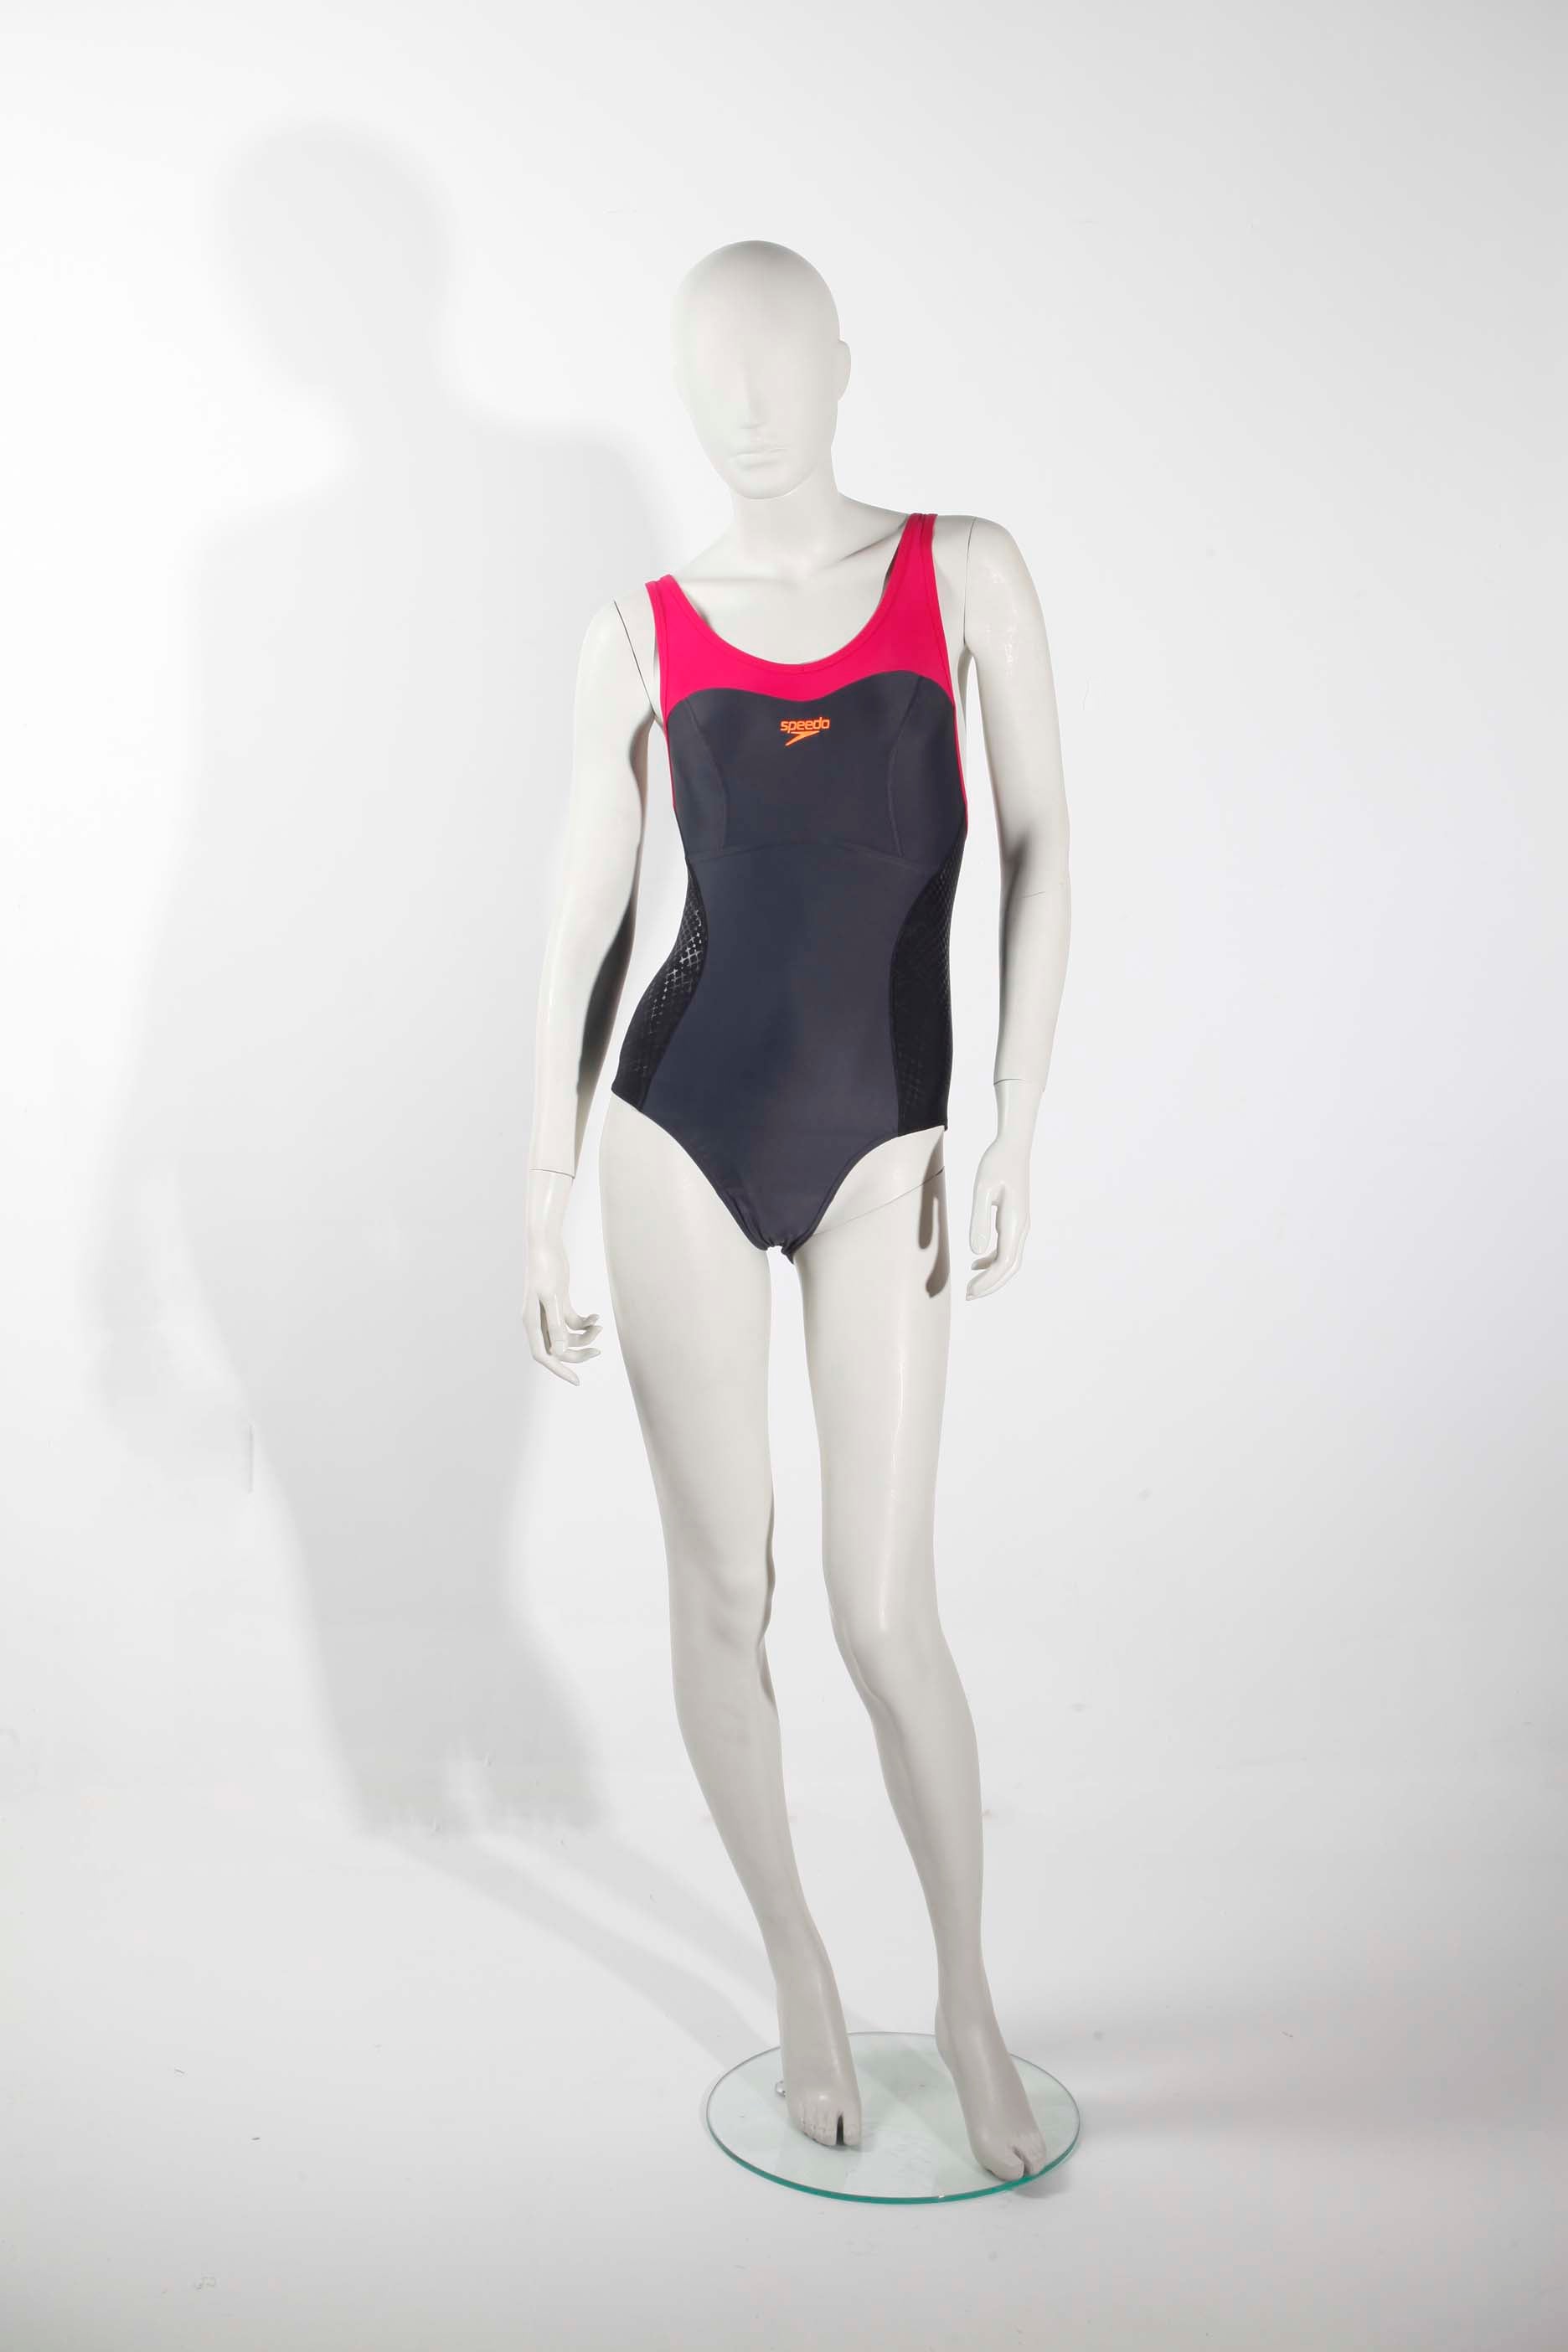 Speedo Pink and Black Swimsuit (small)